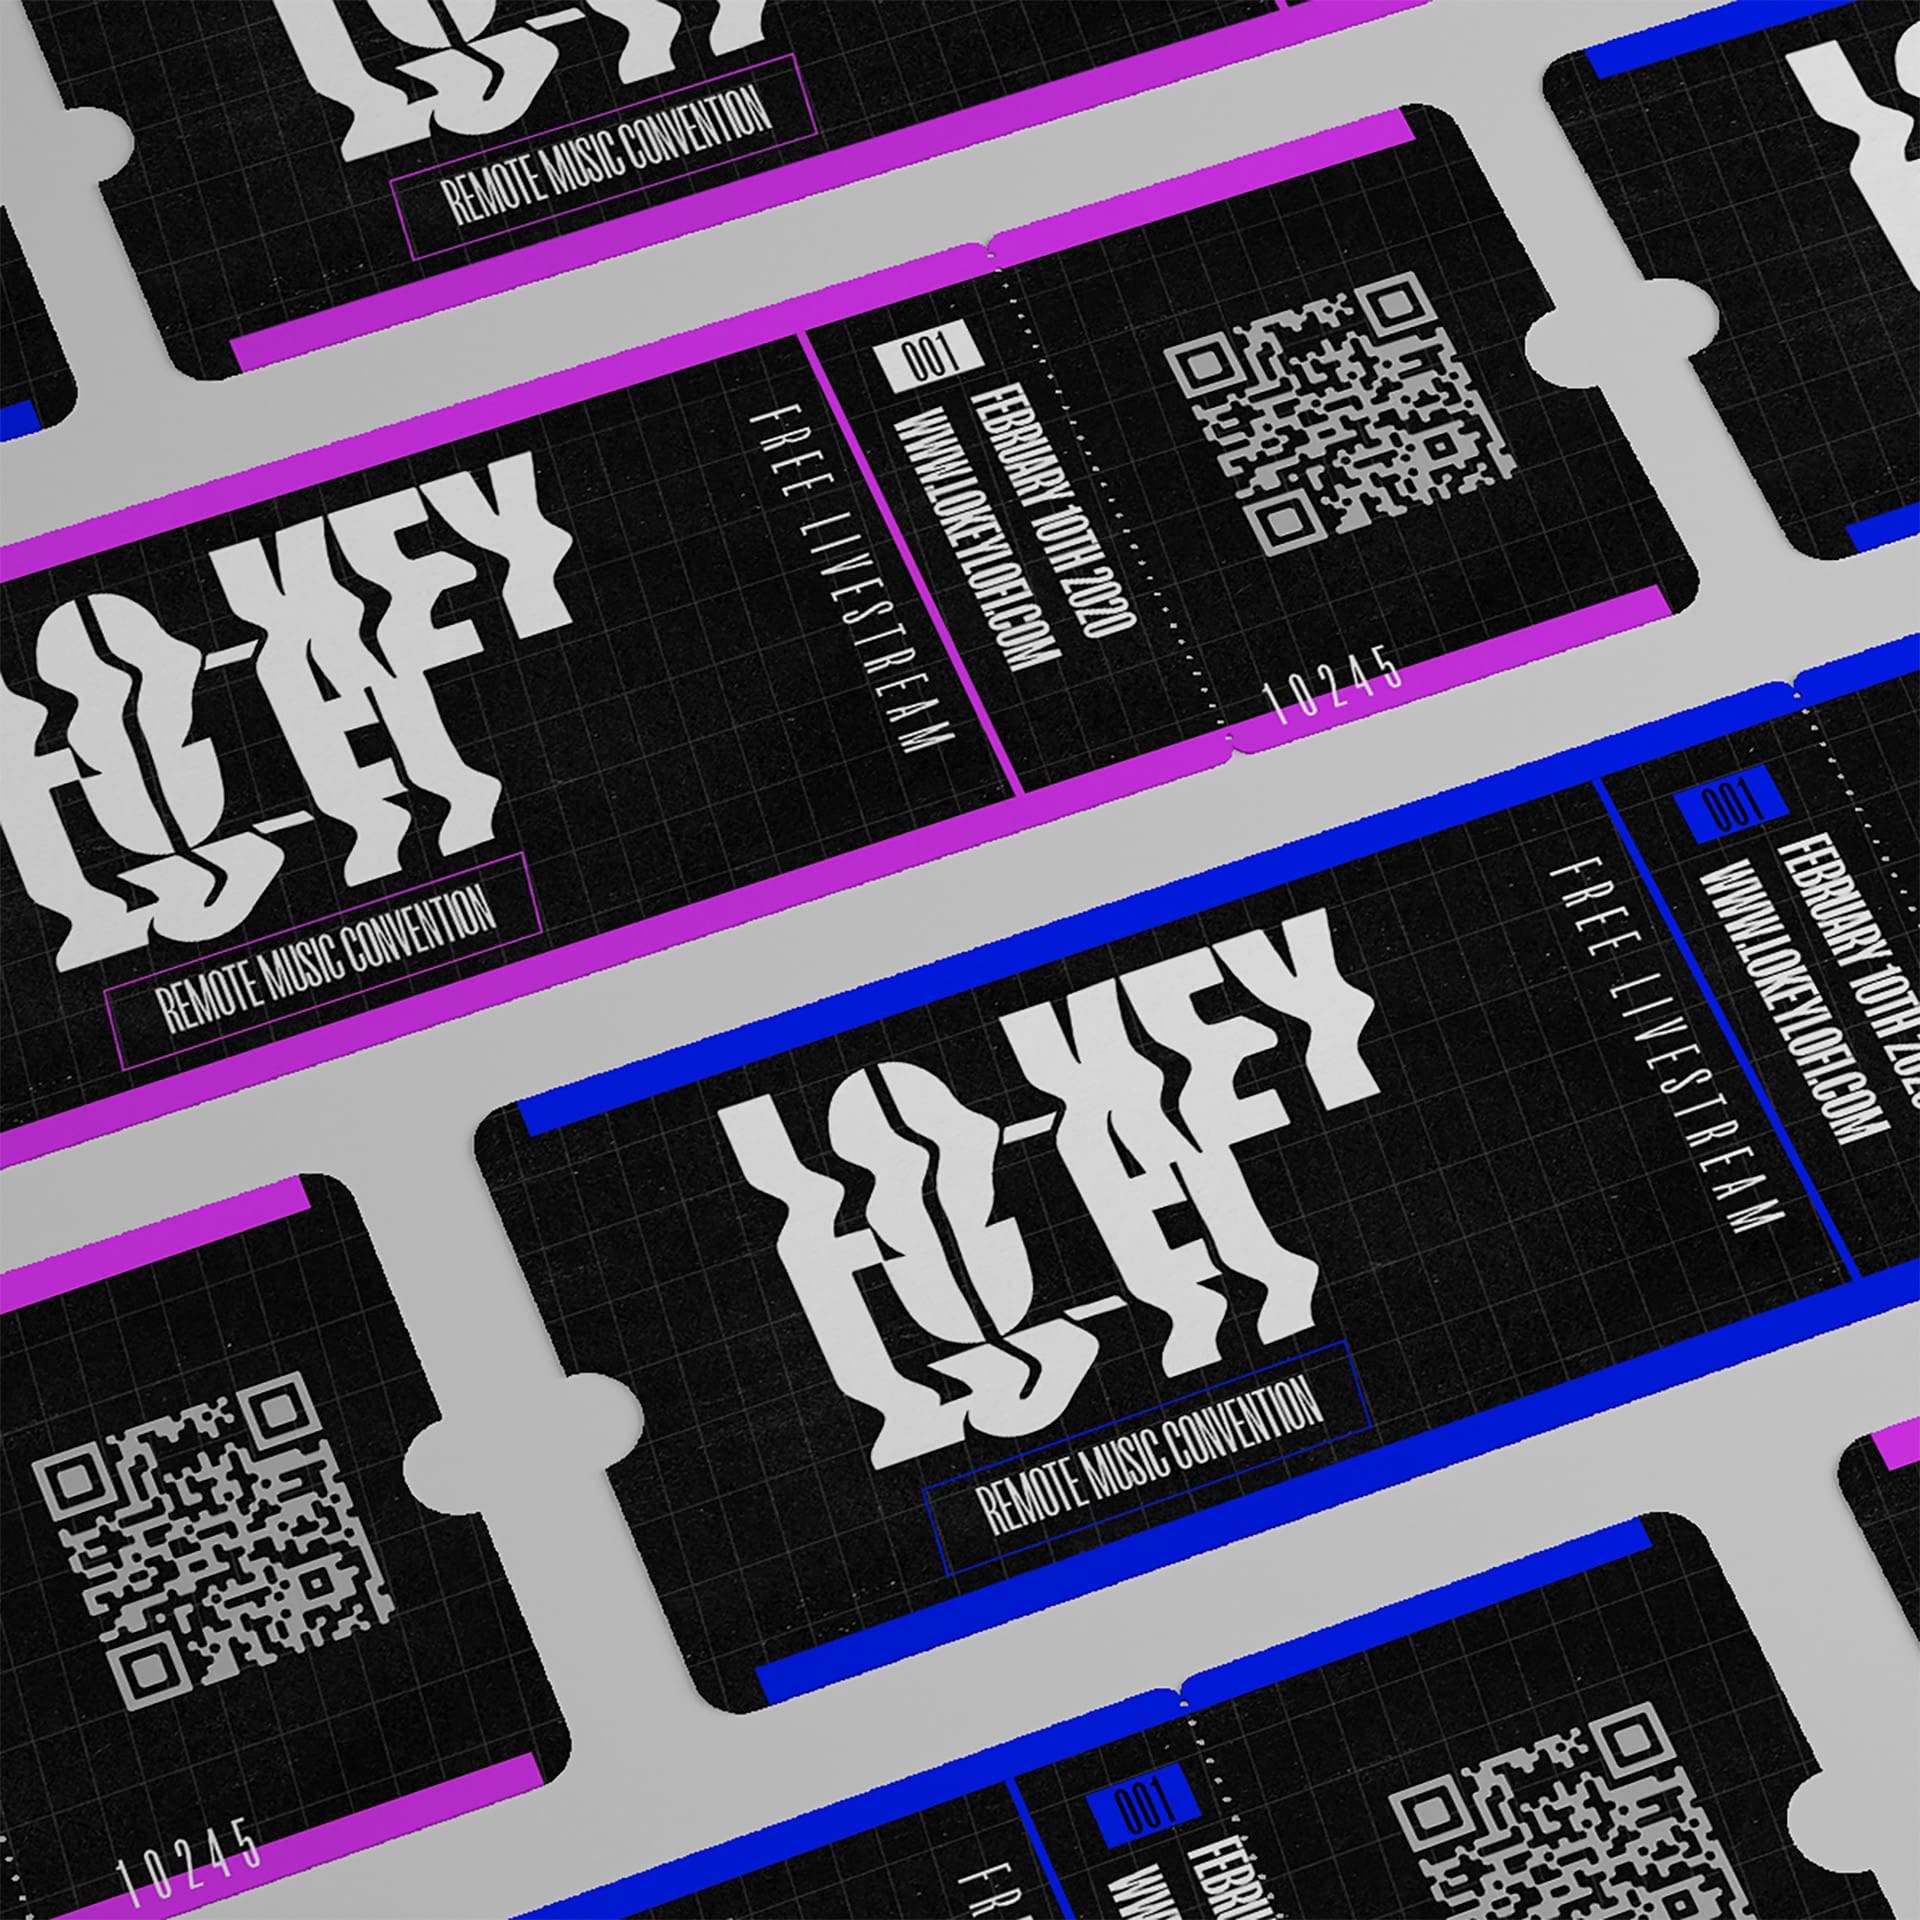 Series of motion assets created for a speculative digital music festival. Rectangular black cards with either blue or purple borders lay in a line on a white background. In white warped text, it says "Lo-Key Lo-Fi Remote Music Convention. Free Livestream".